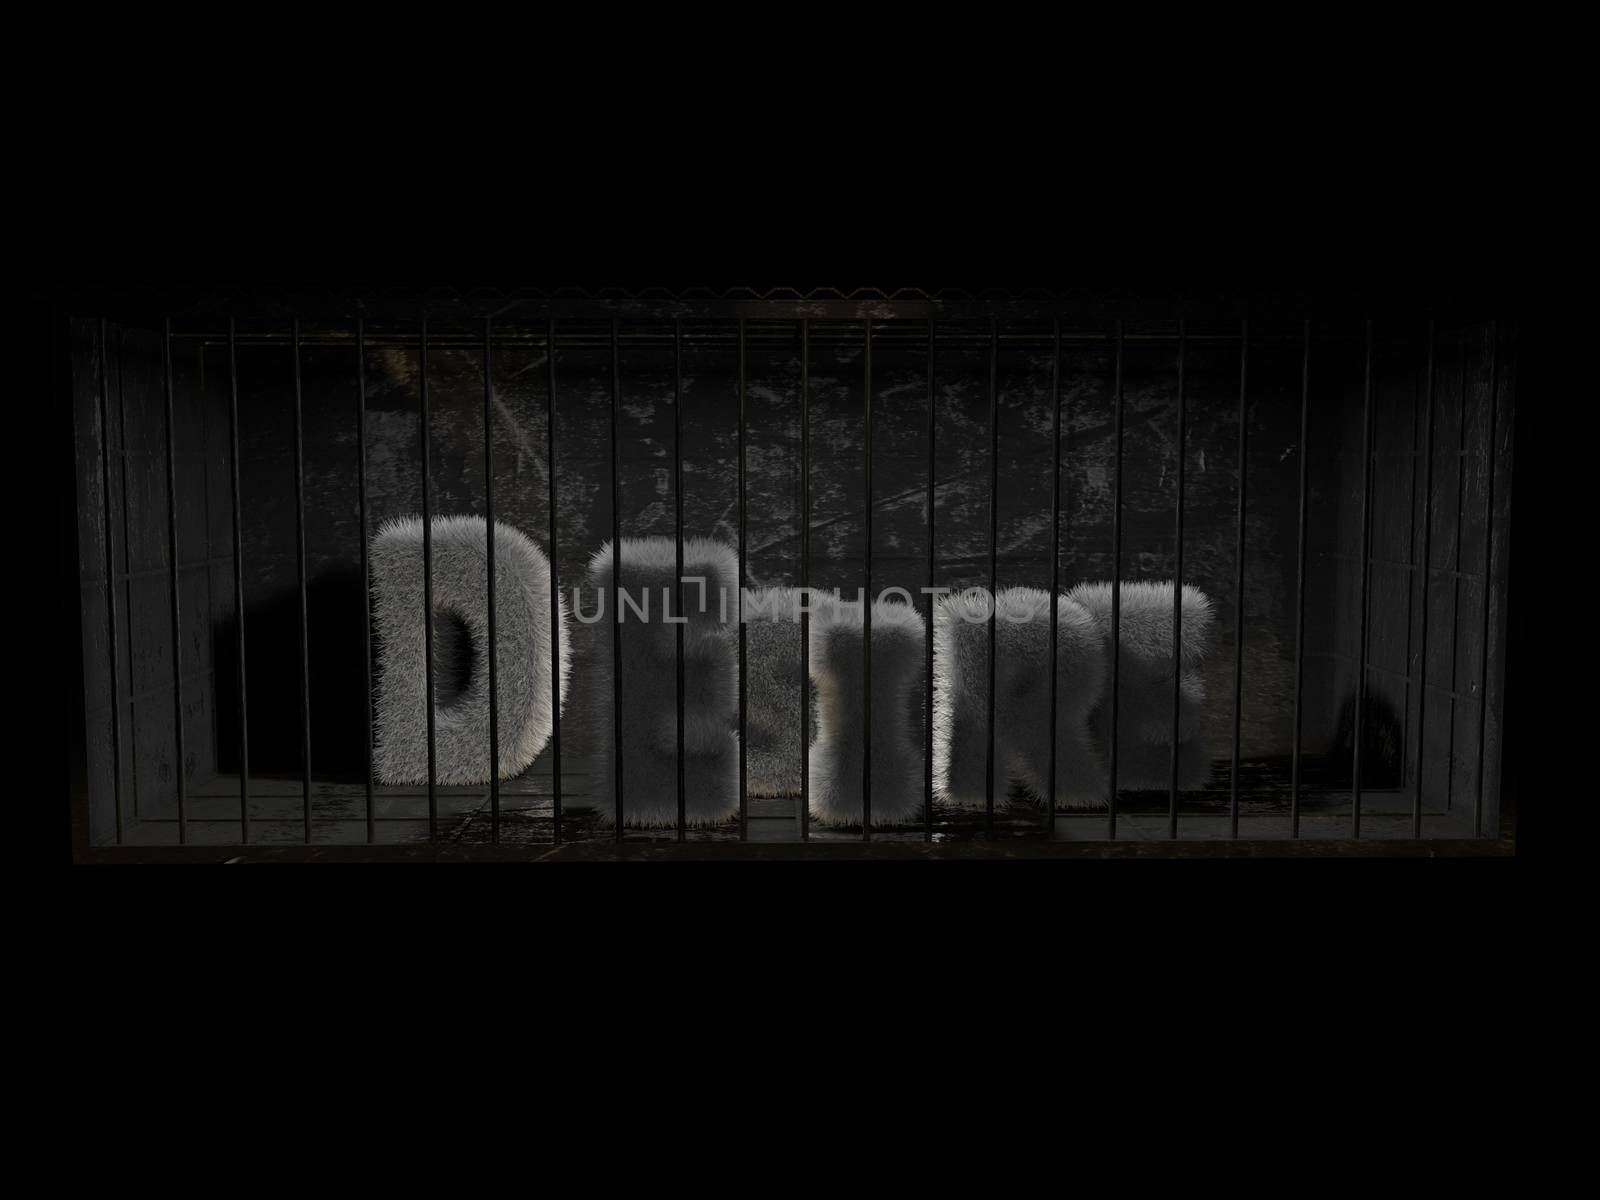 A fluffy word (desire) with white hair behind bars with black background.